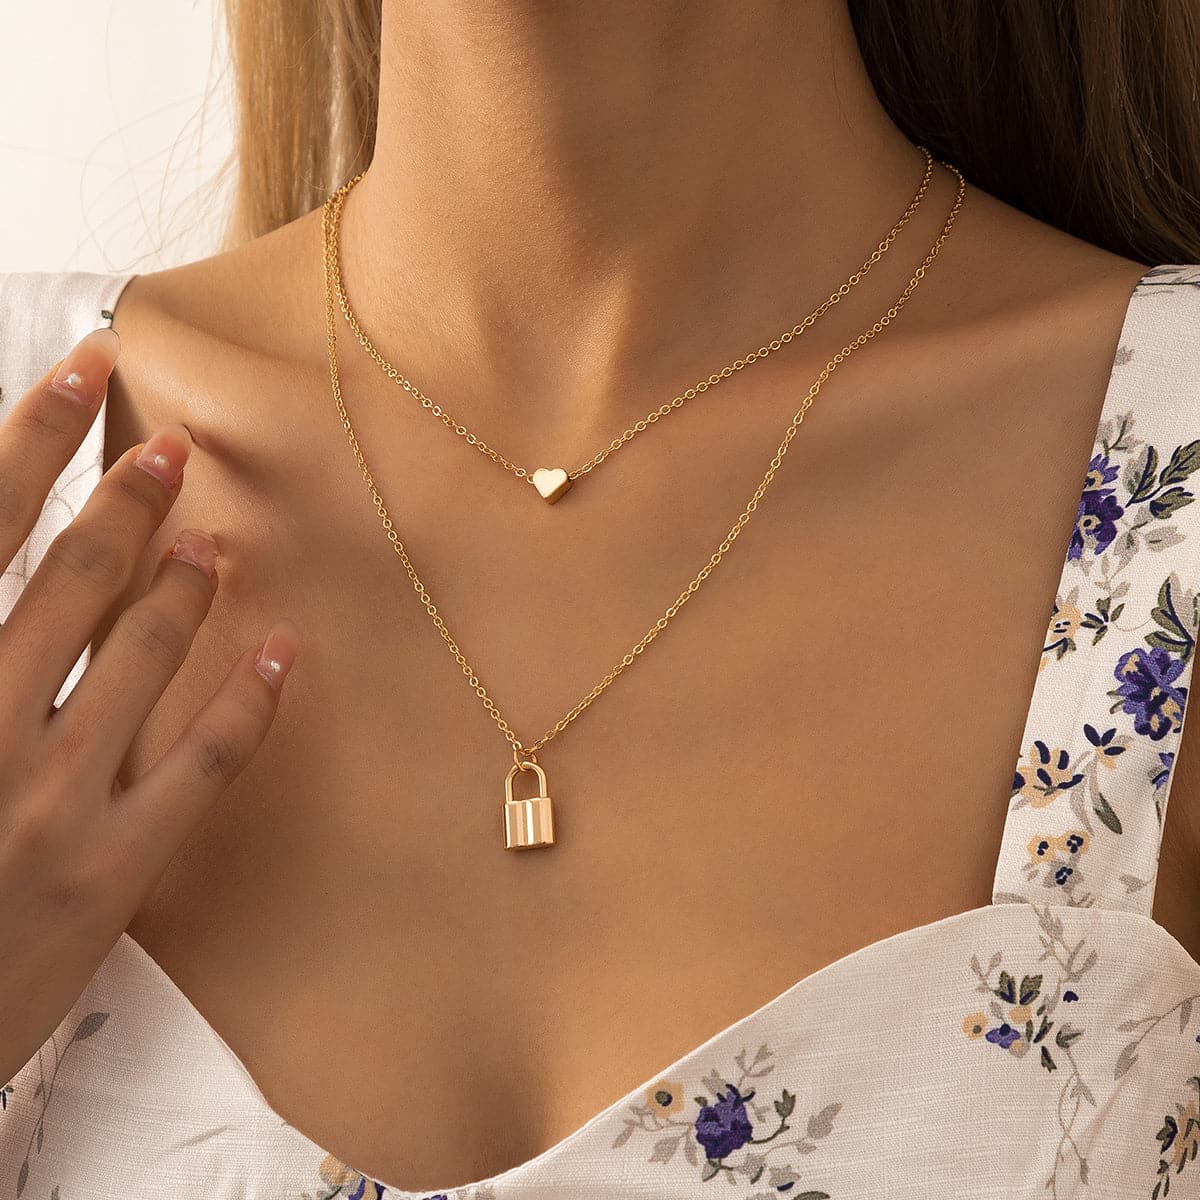 18K Gold-Plated Heart & Lock Layered Pendant Necklace